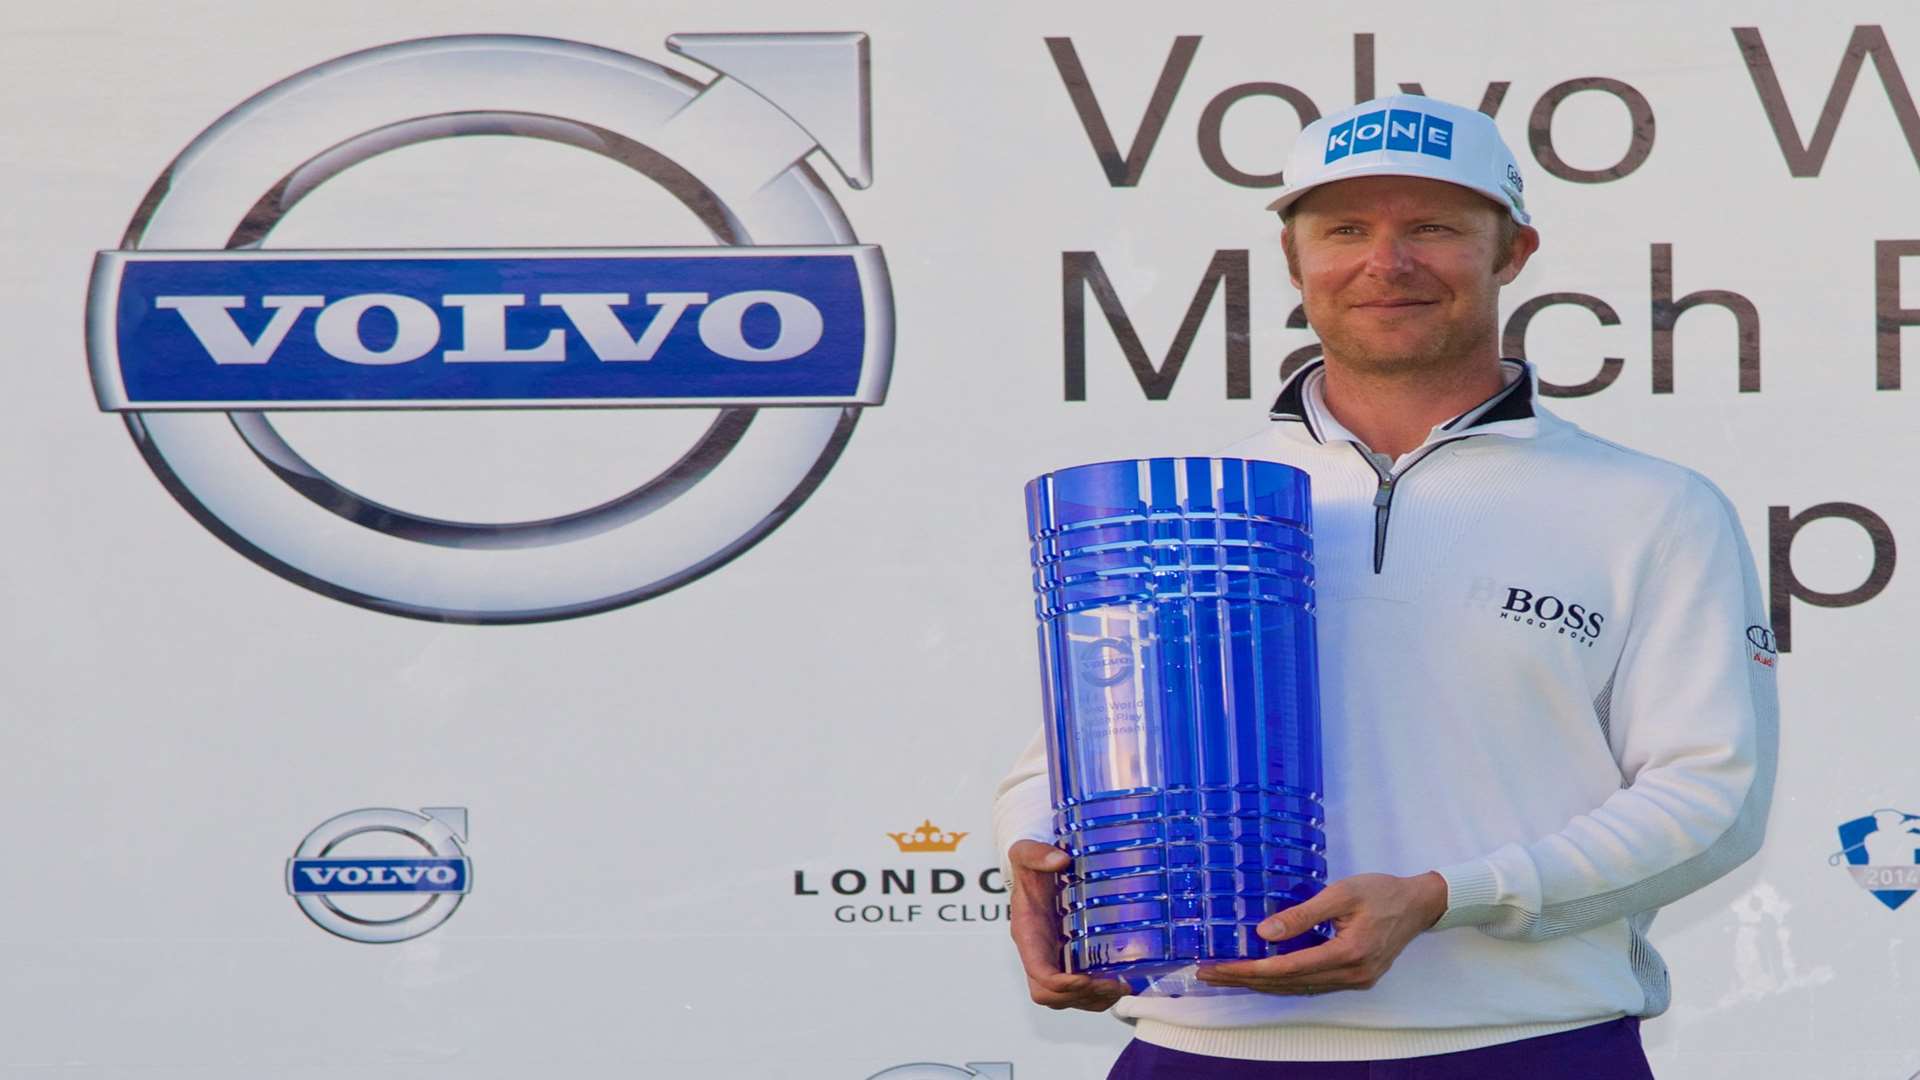 Mikko Ilonen with the Volvo World Match Play trophy Picture: Volvo in Golf